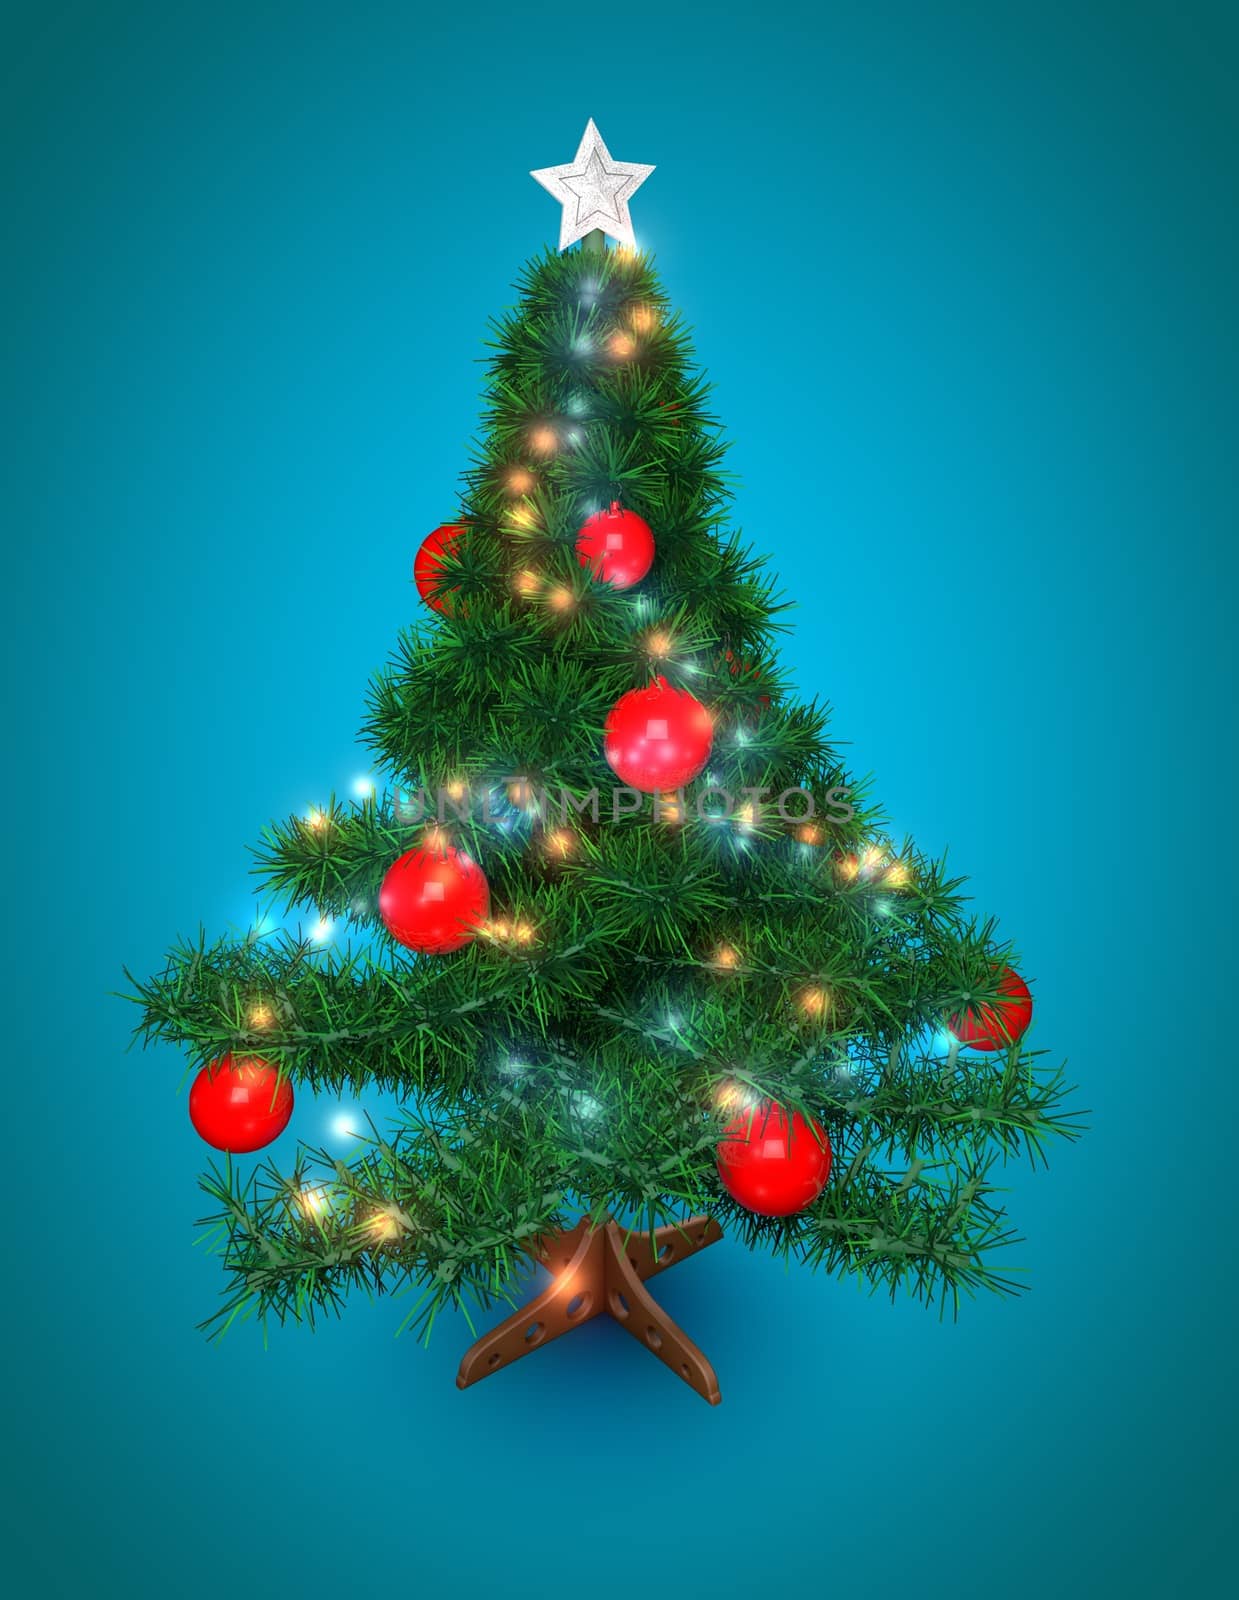 Rendered image with a Christmas tree.